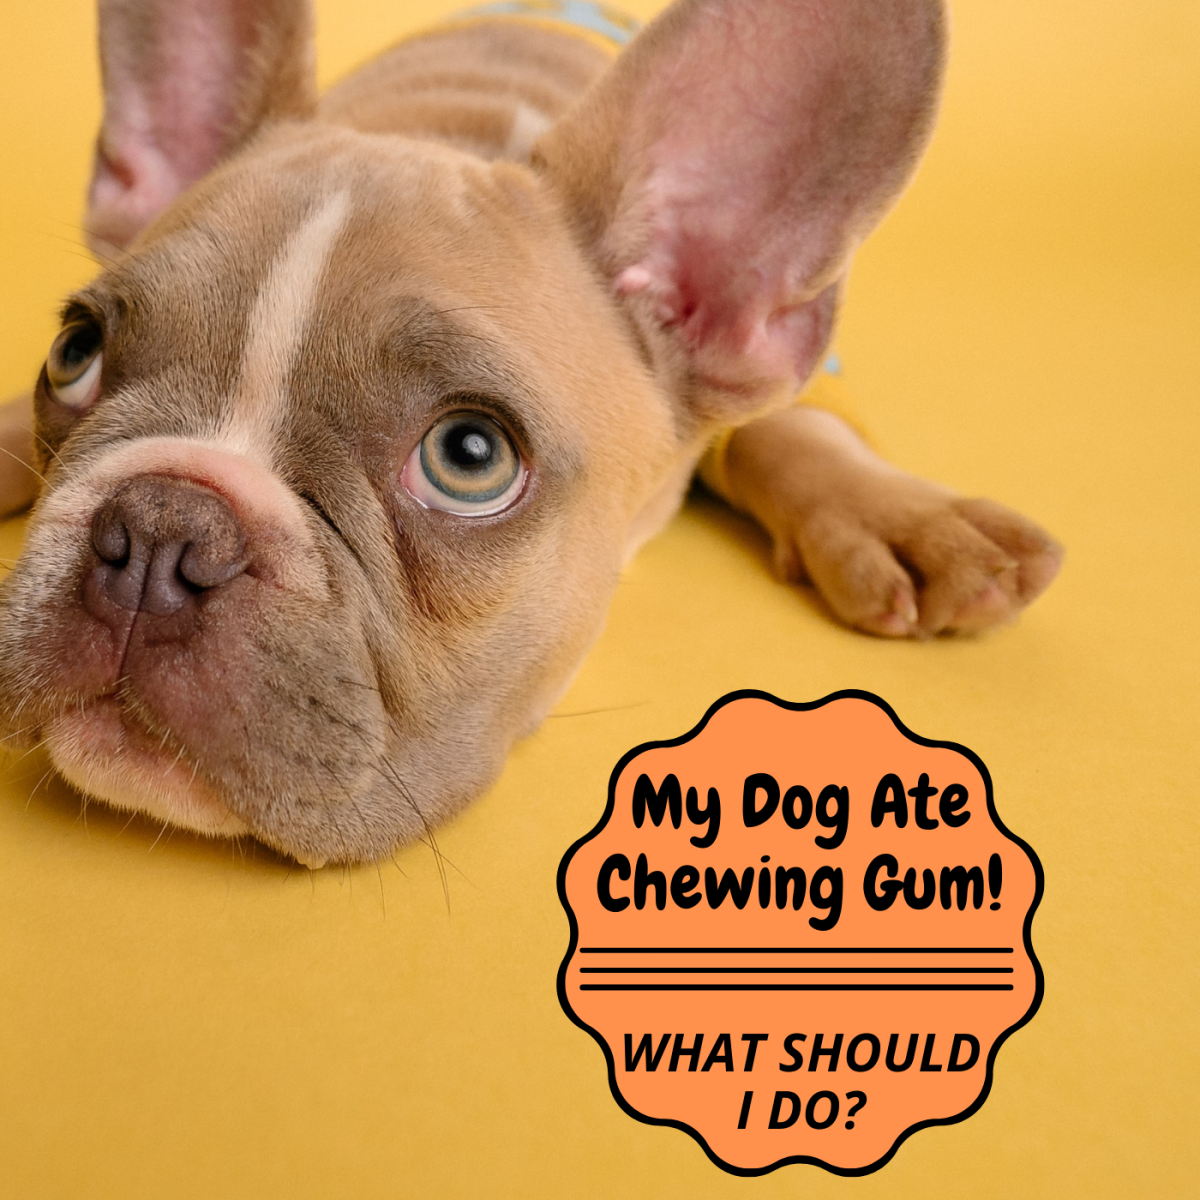 If the chewing gum your dog consumed contains xylitol, call your vet or an emergency line immediately. 